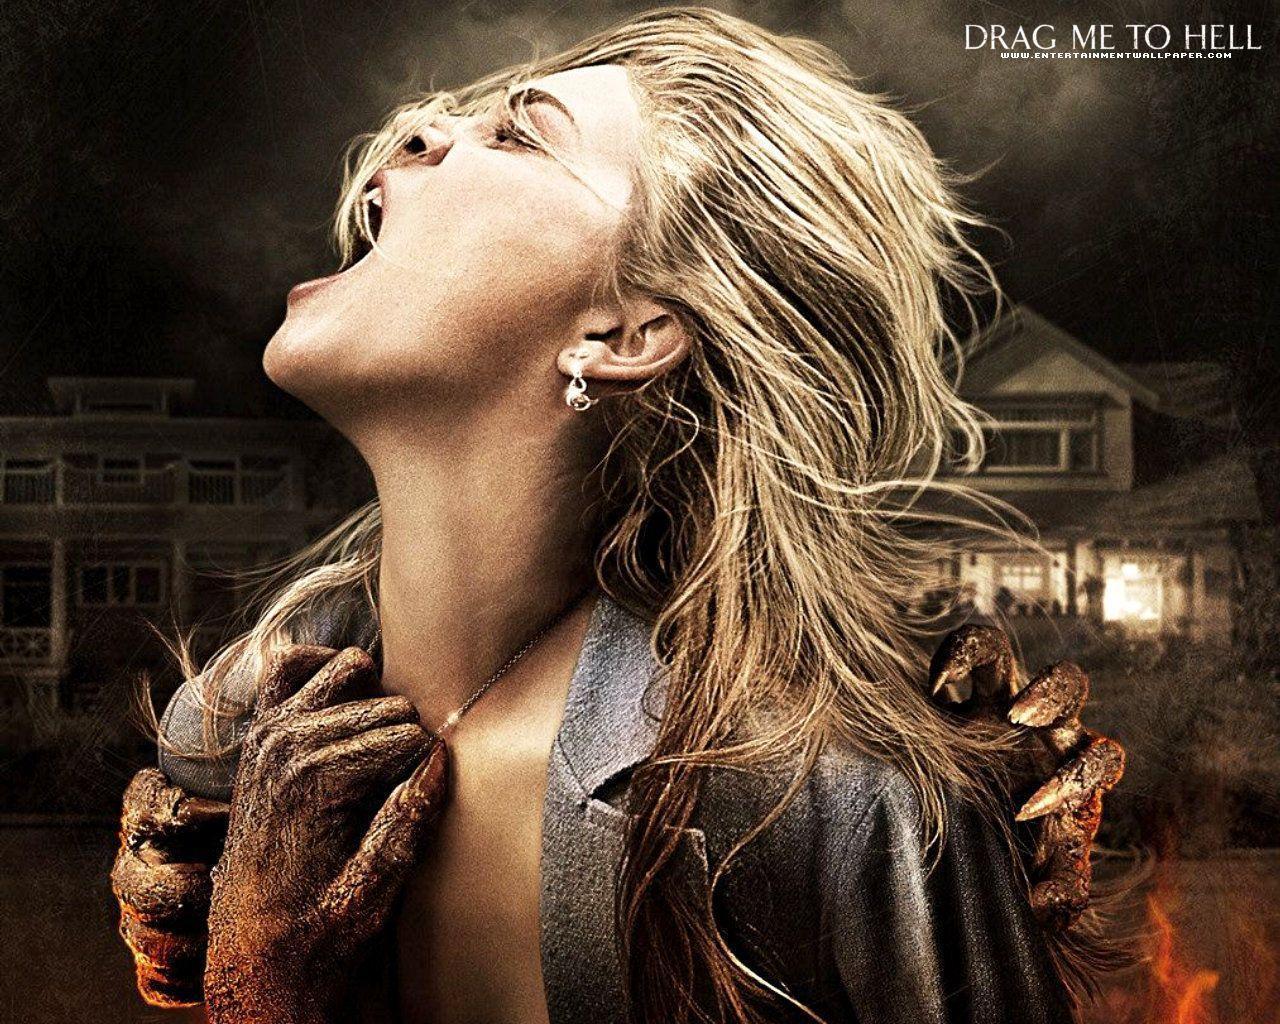 Drag Me to Hell wallpaper Movies Wallpaper 6396118